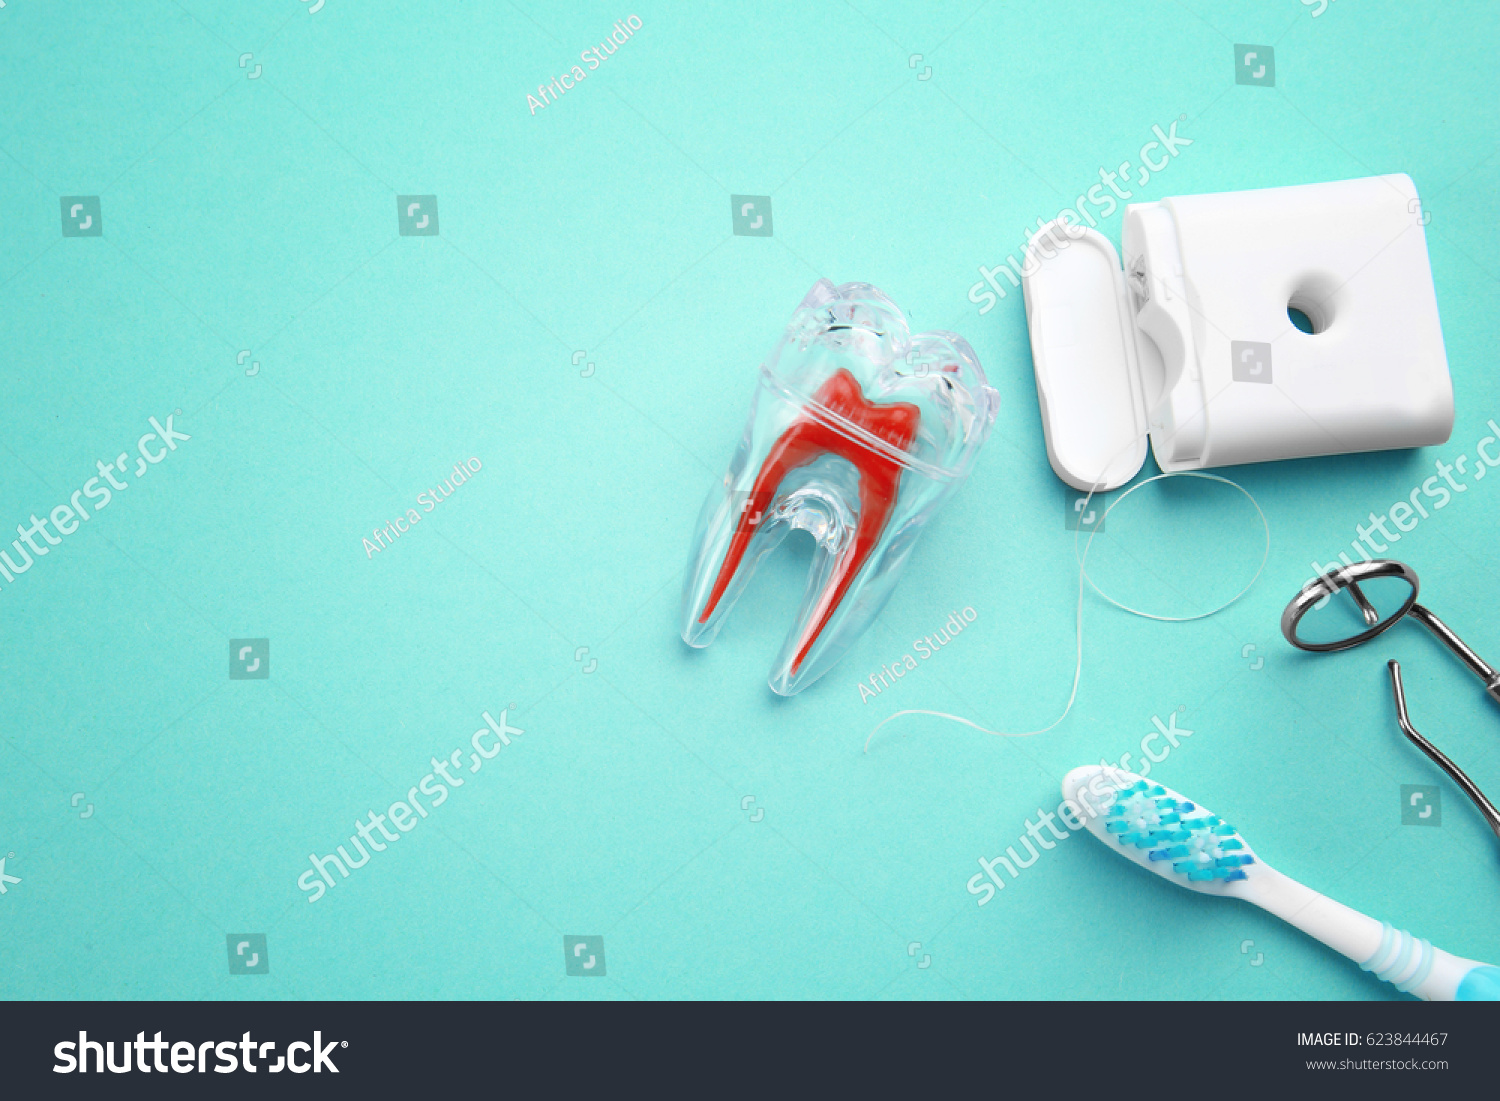 Download Toothbrush Plastic Tooth Mockup Dental Instruments Stock Photo (Edit Now) 623844467 - Shutterstock